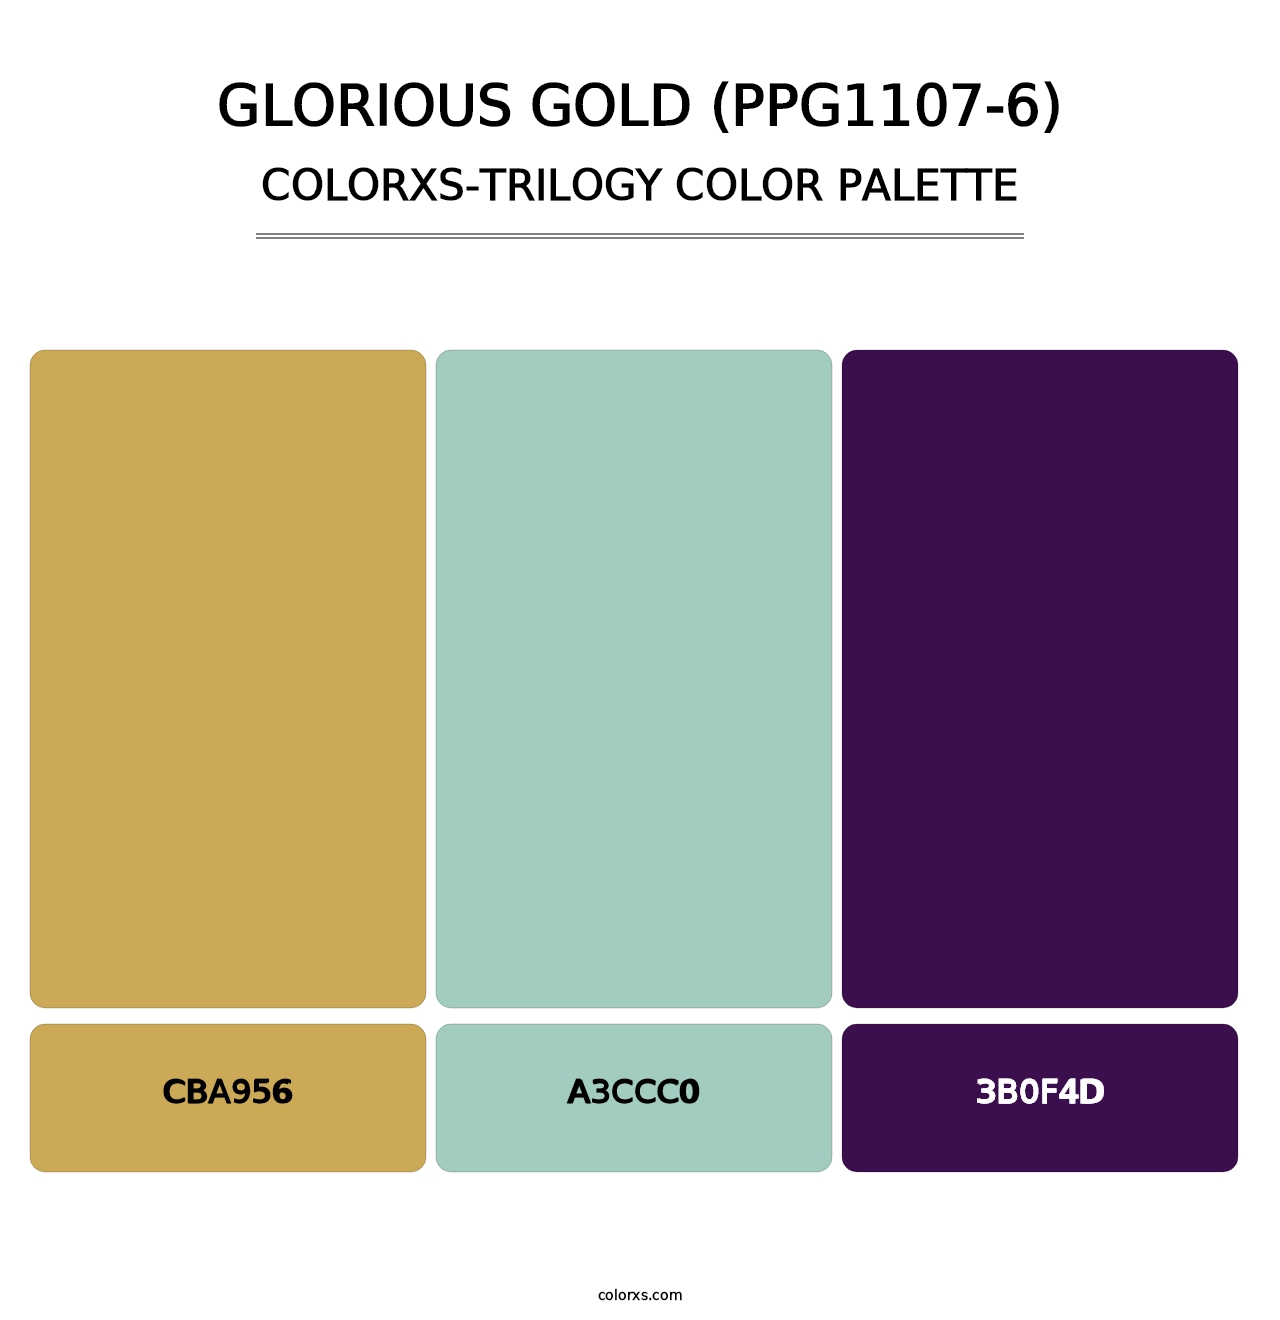 Glorious Gold (PPG1107-6) - Colorxs Trilogy Palette